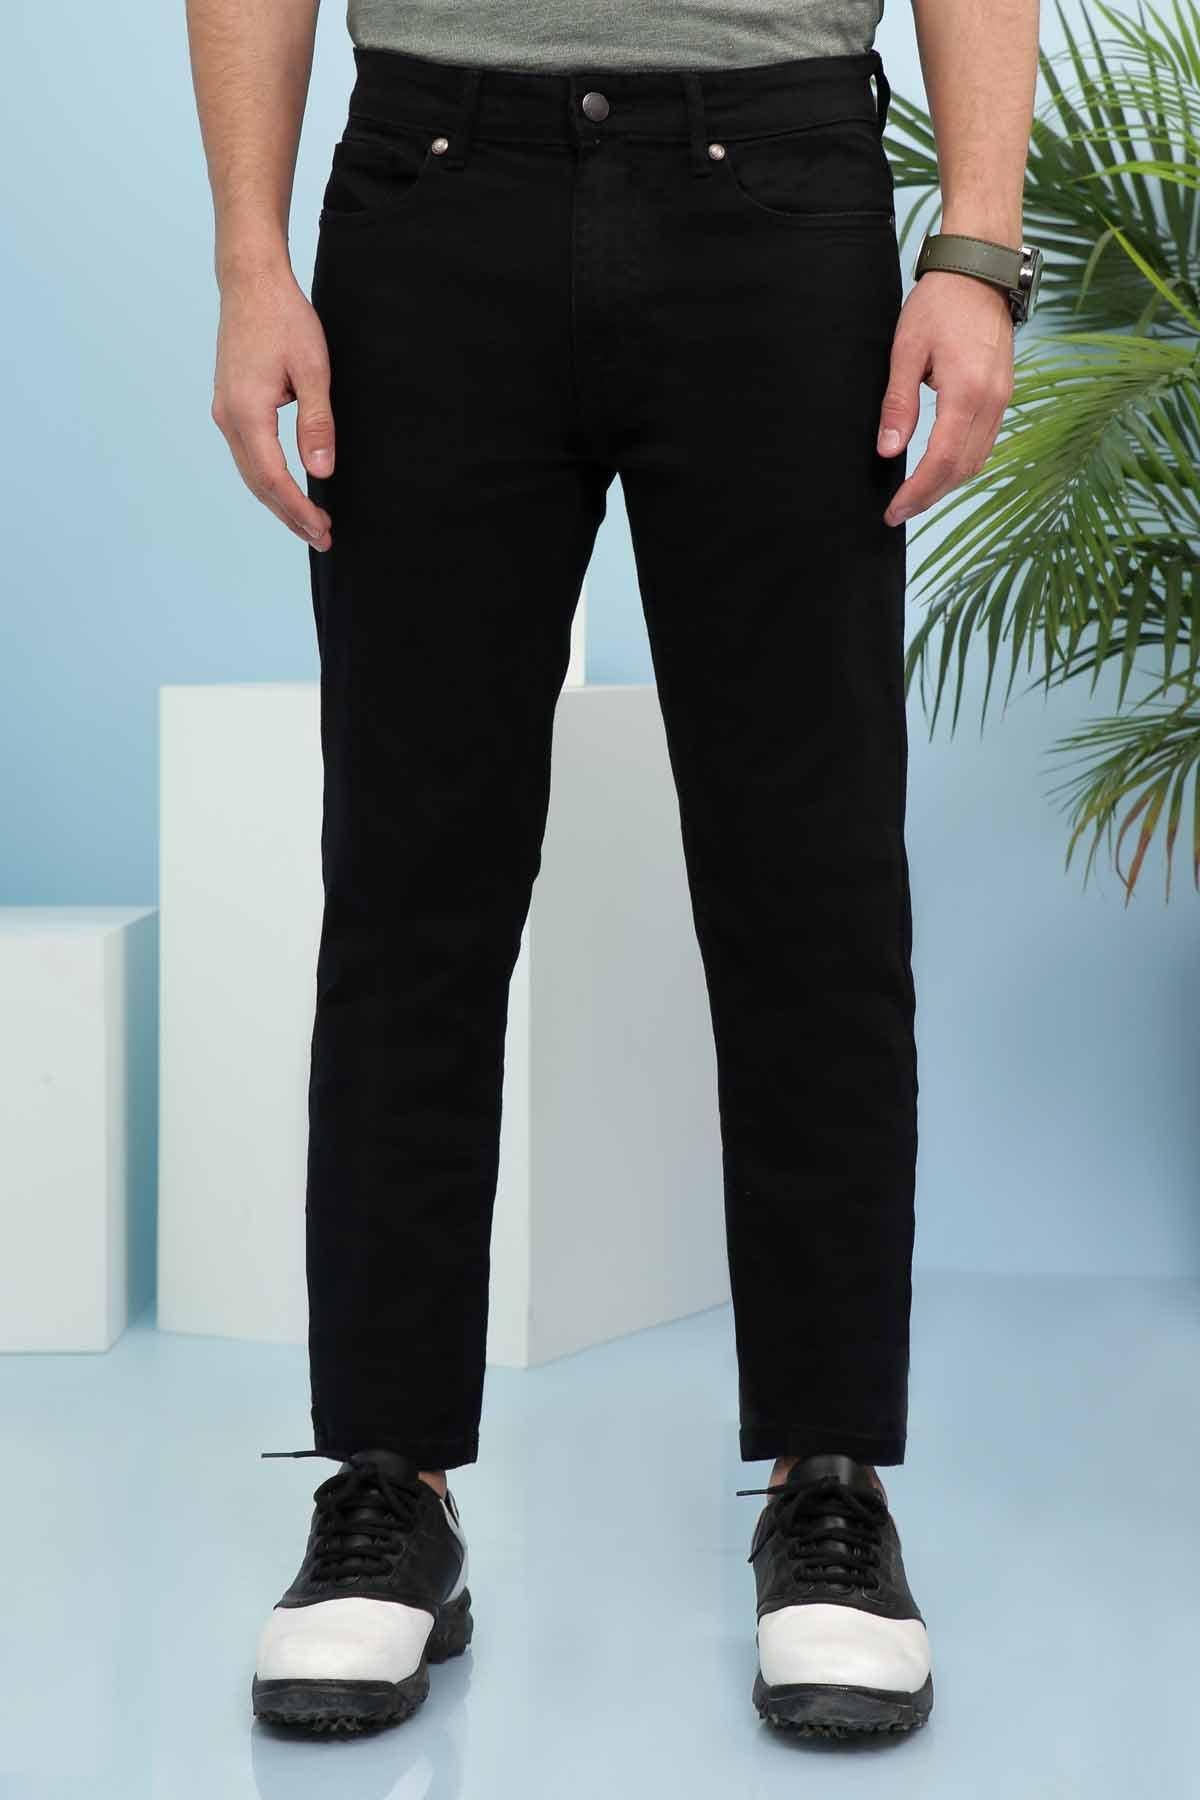 JEAN SLIM FIT BLACK at Charcoal Clothing